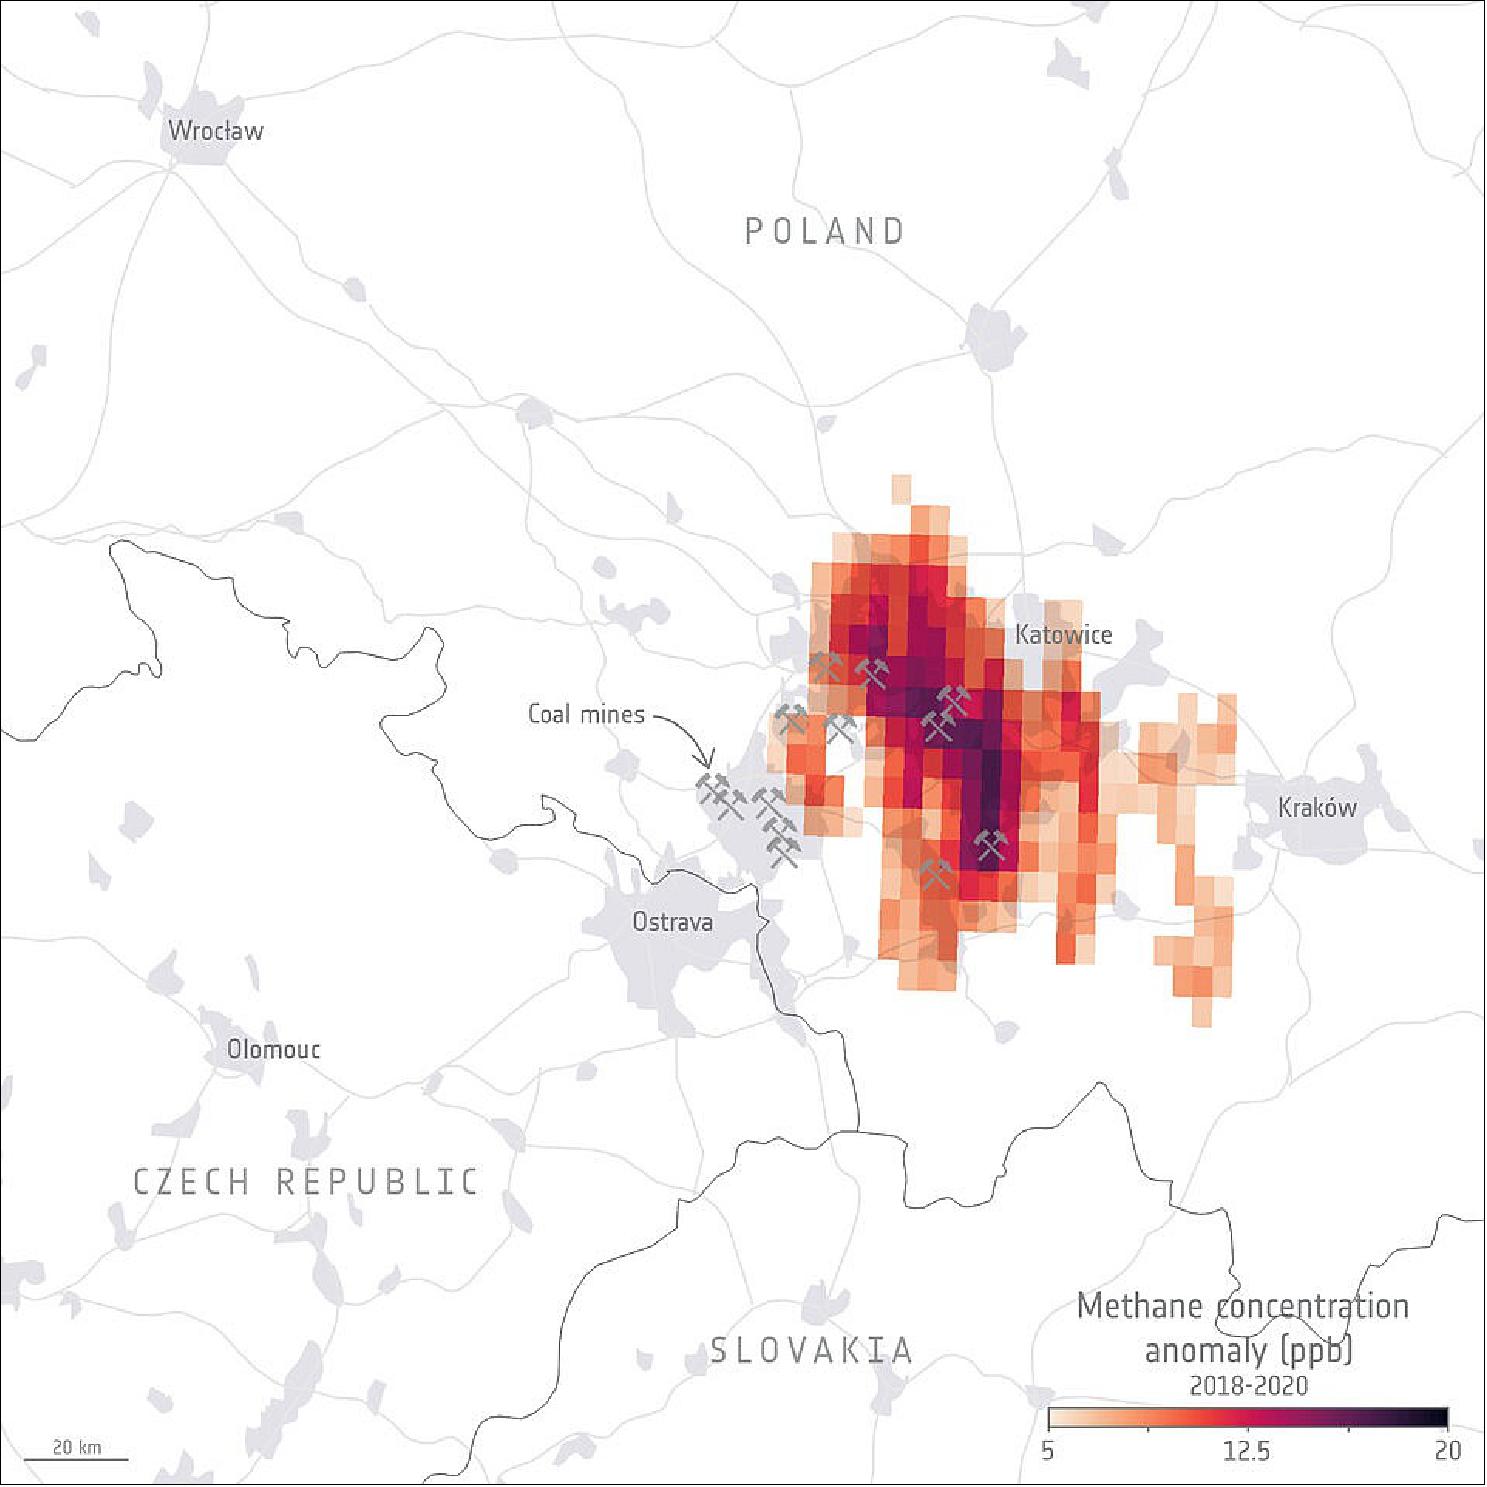 Figure 26: This map shows the averaged methane concentration anomalies detected by the TROPOMI instrument on the Copernicus Sentinel-5P satellite from 2018-2020 over southern Poland. The pickaxes indicate the positions of the largest underground coal mines (image credit: ESA, the image contains modified Copernicus Sentinel data (2018-20), processed by the University of Leicester)